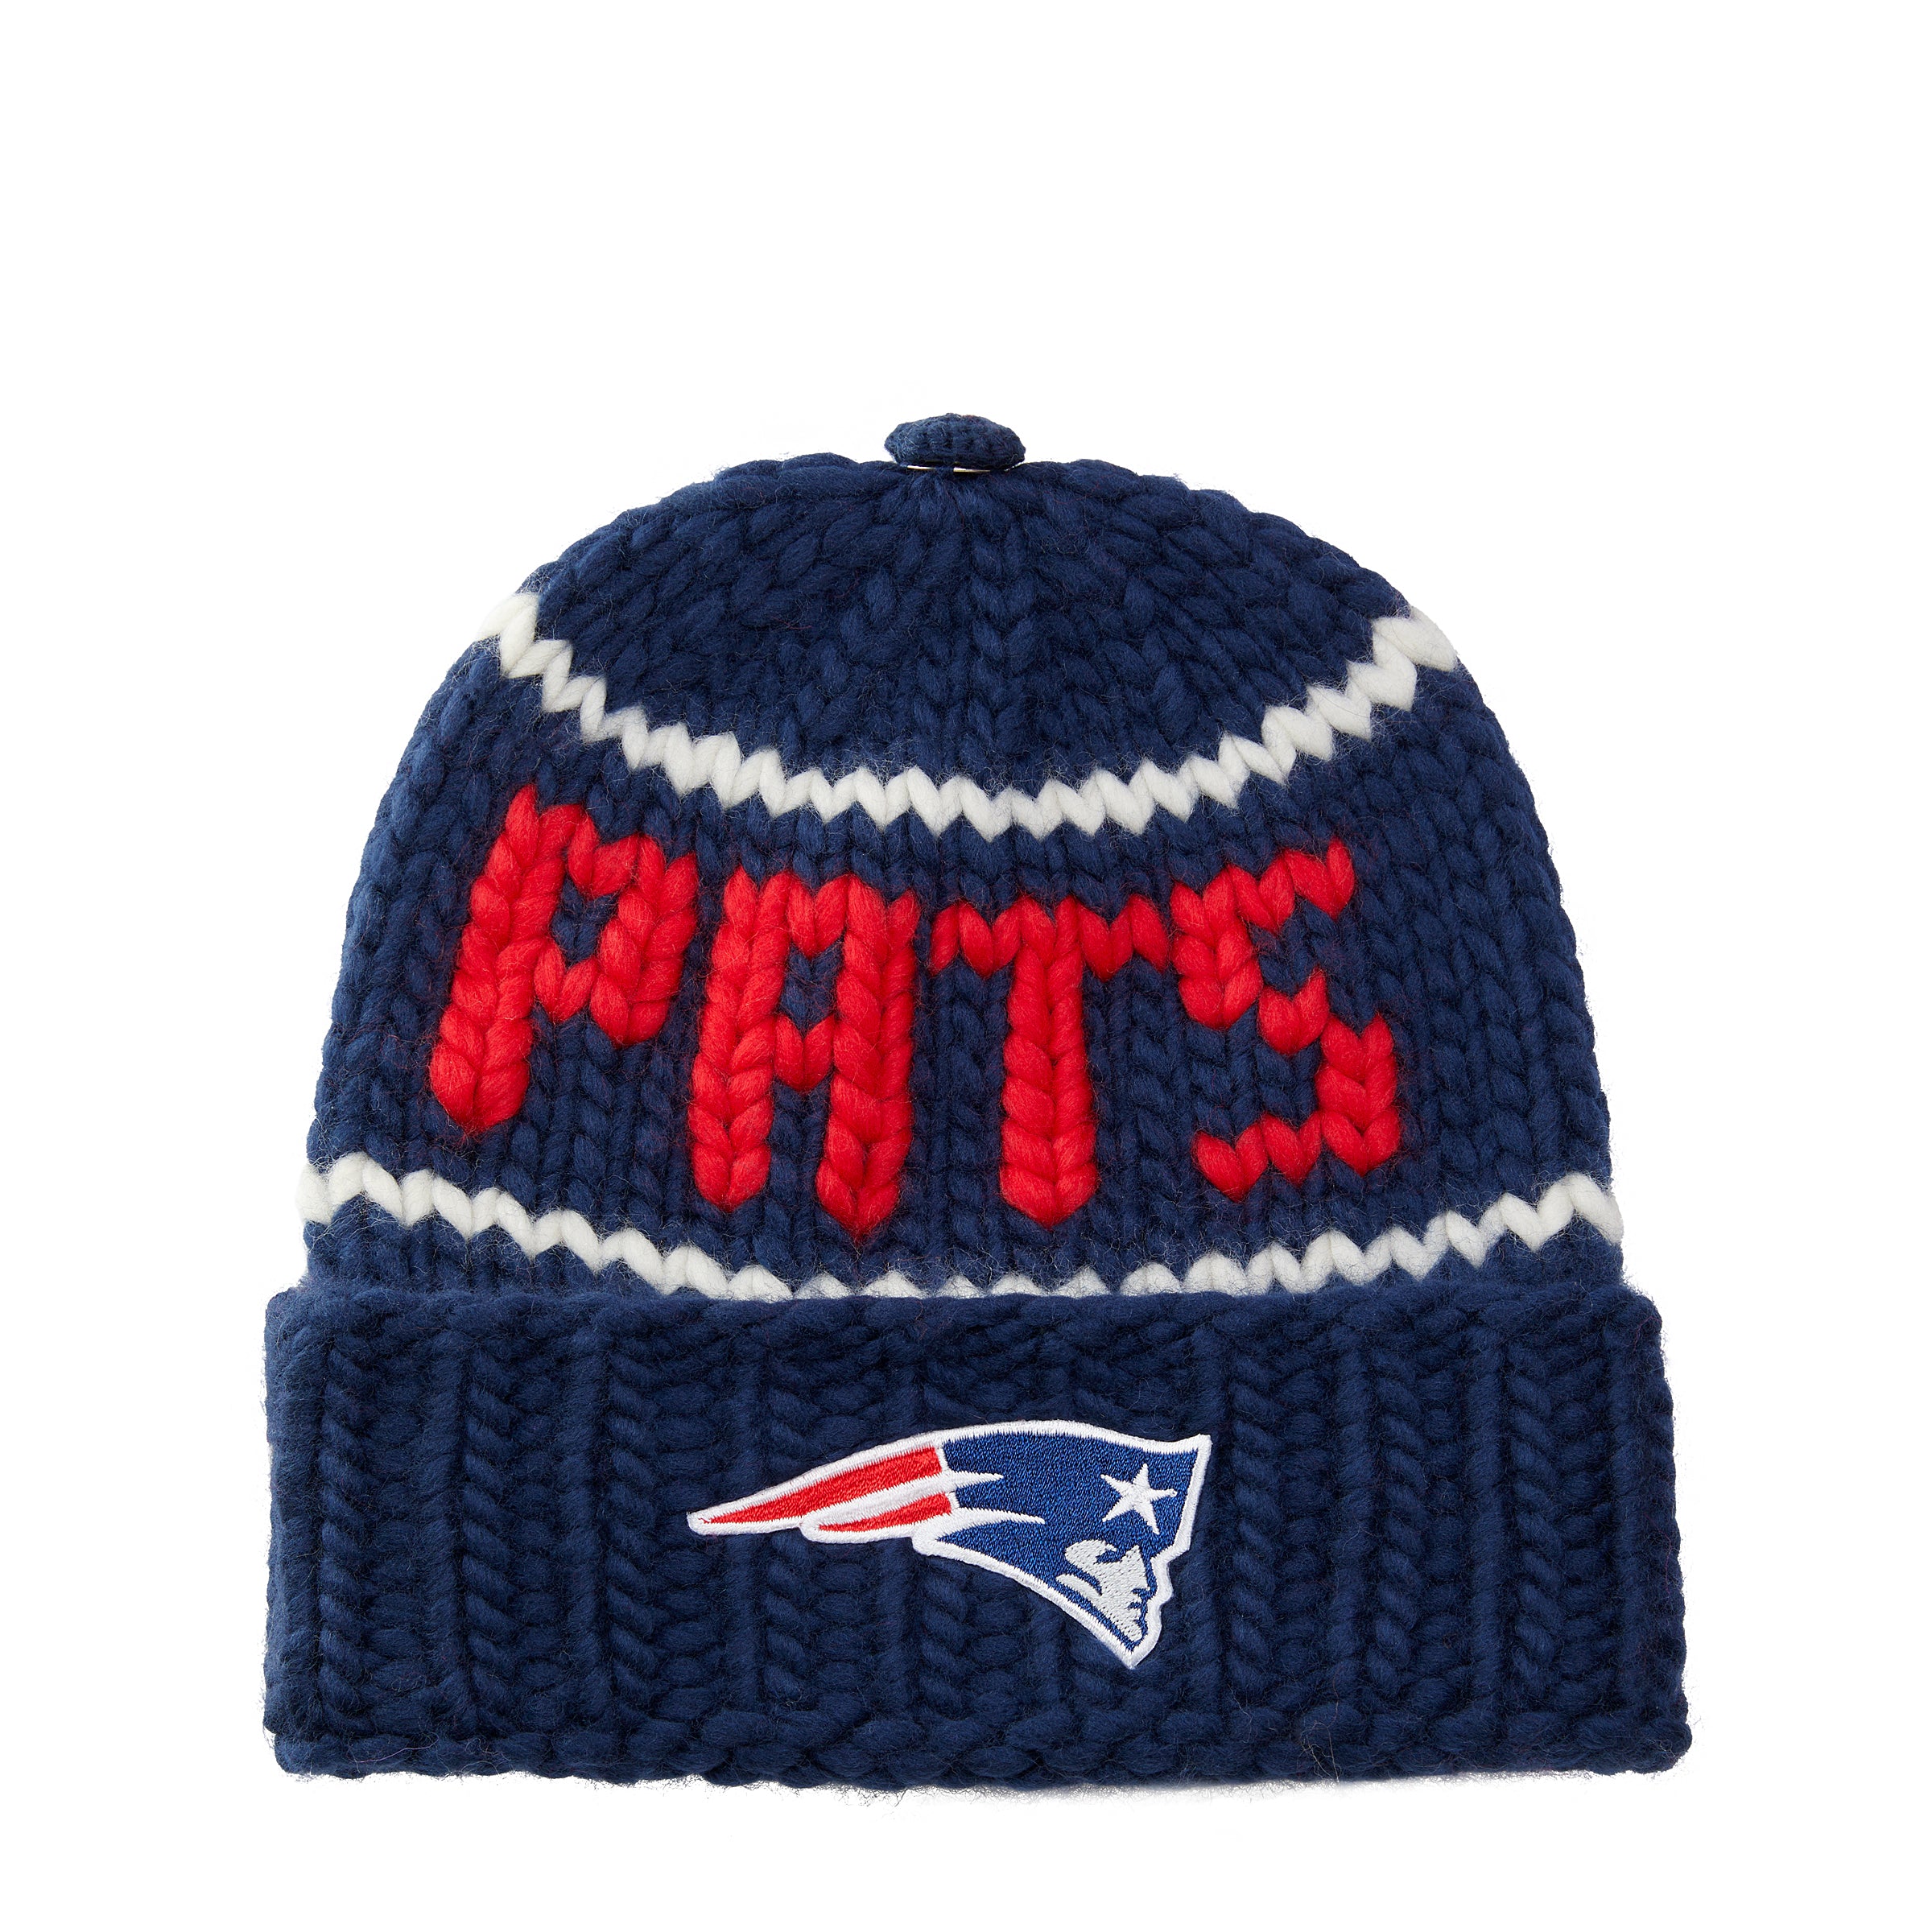 The Pats NFL Beanie with Navy Snap Cover